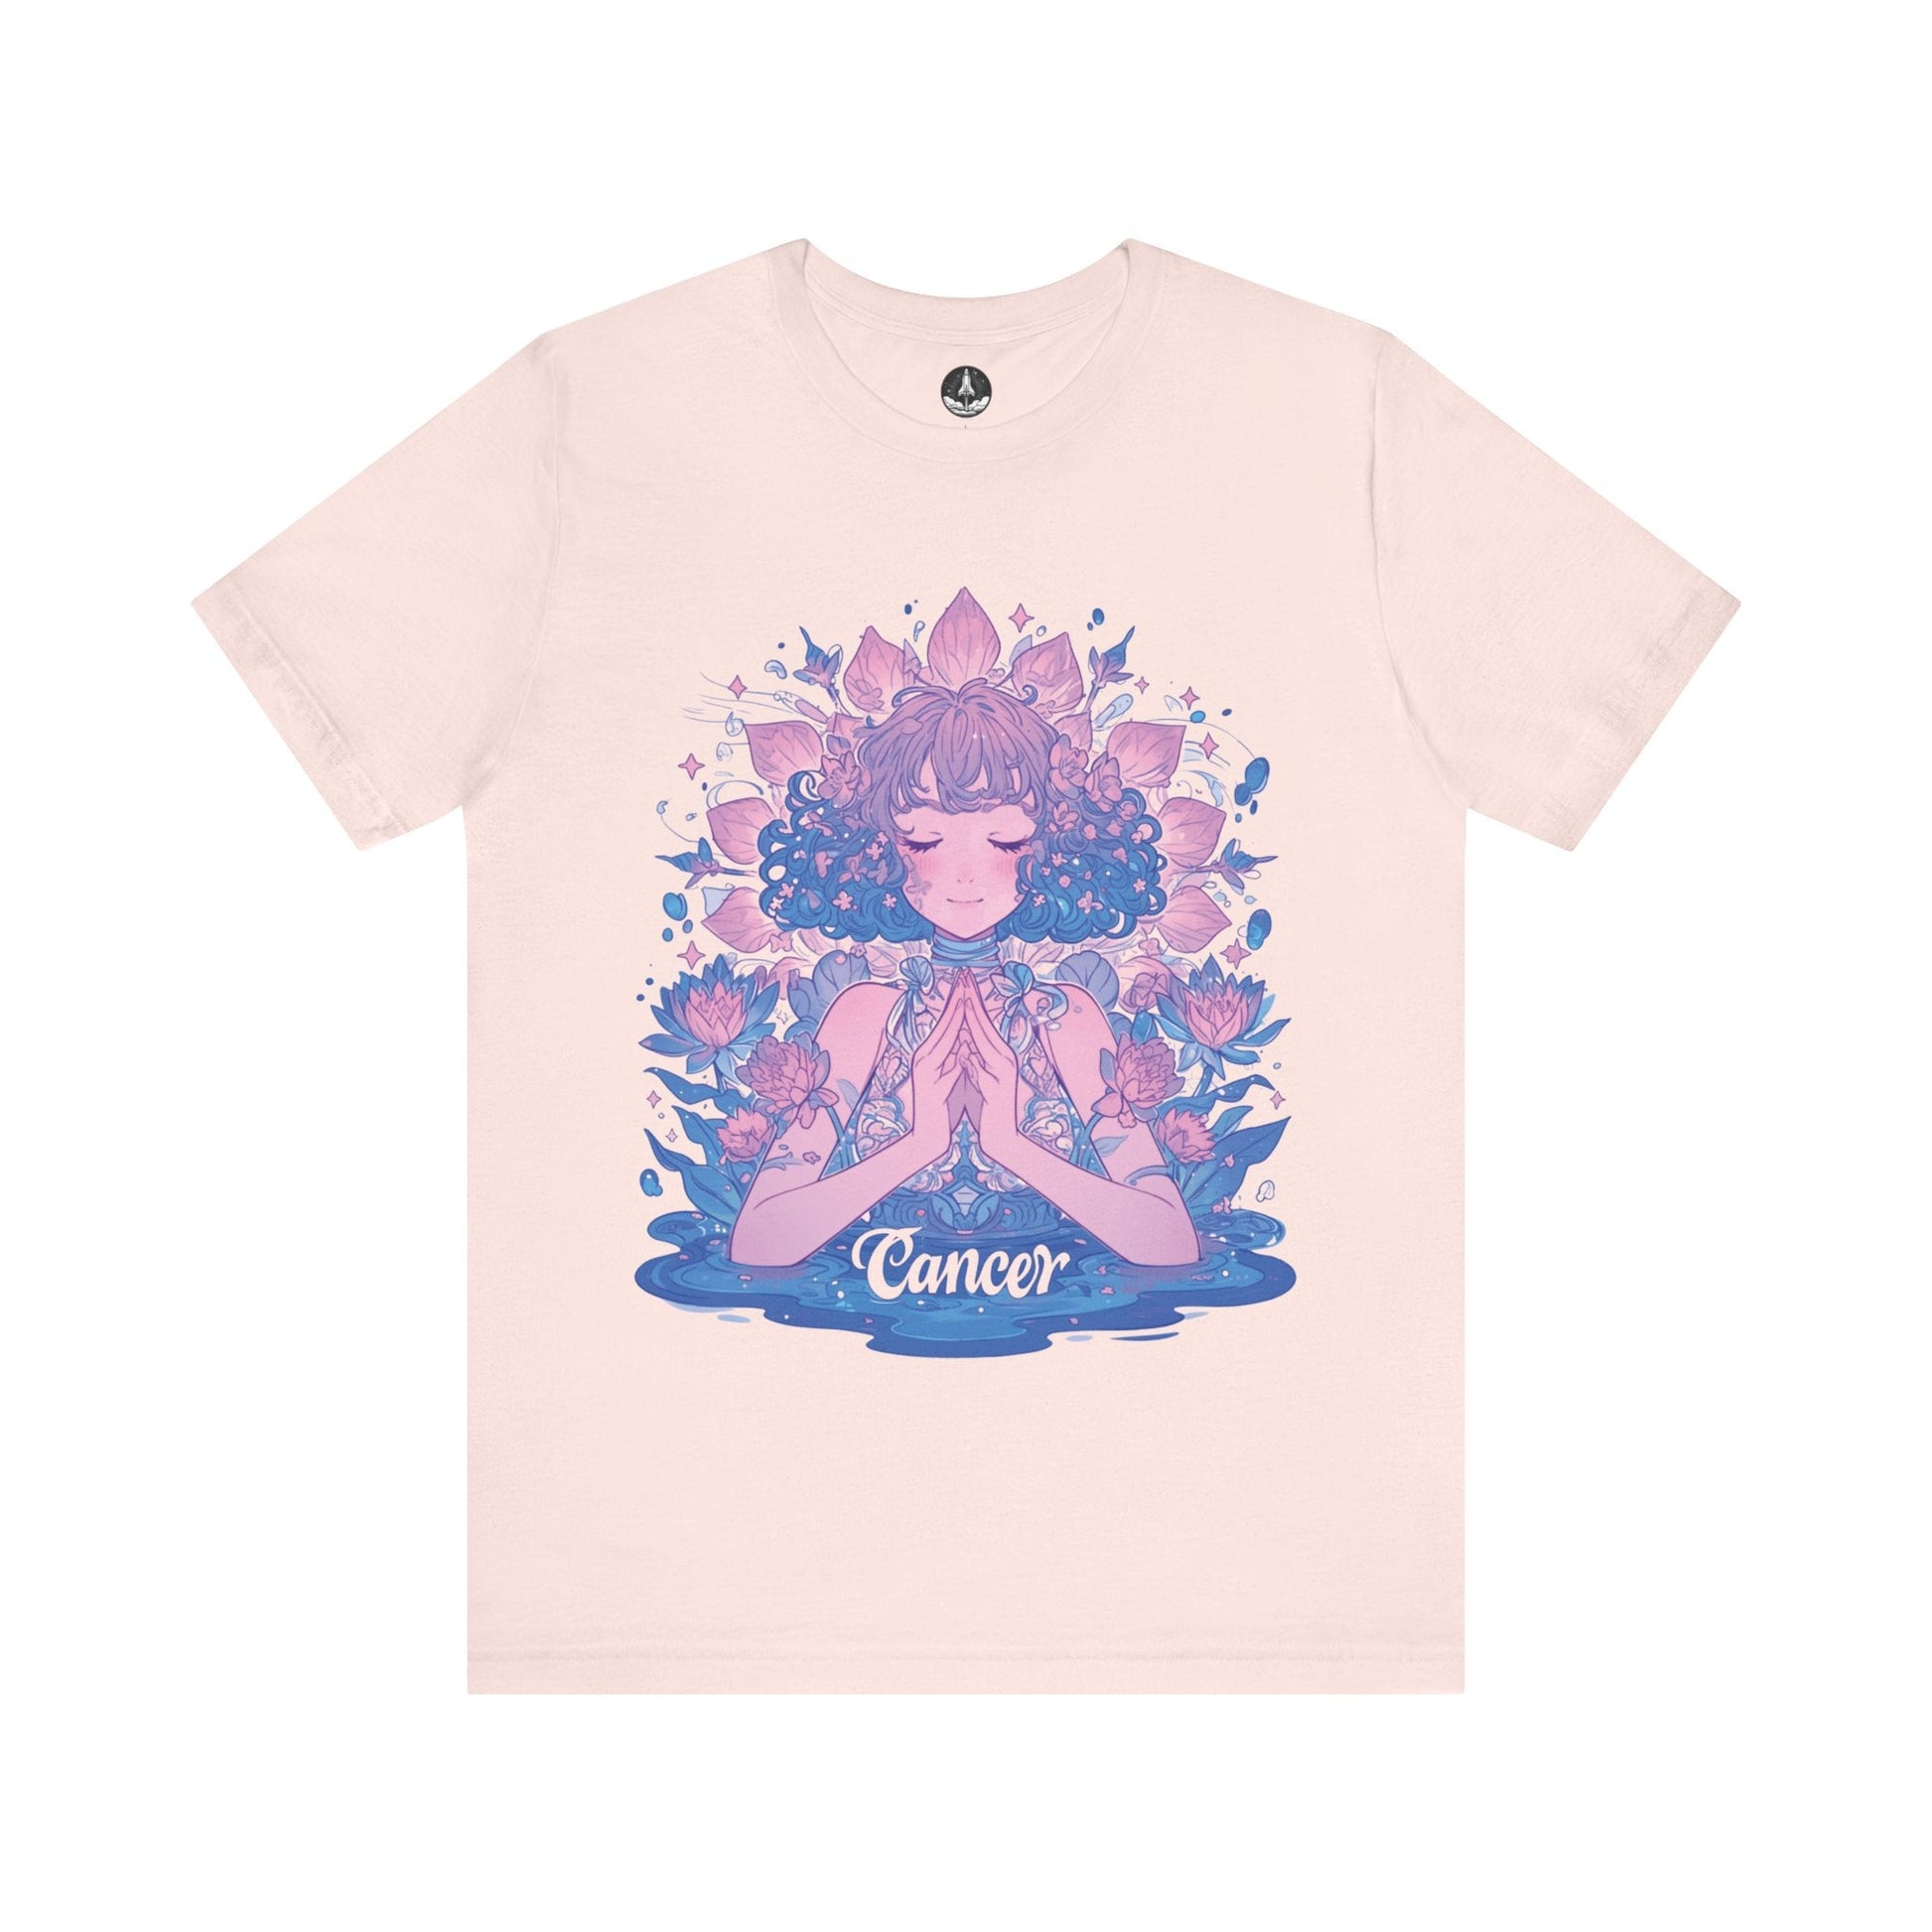 T-Shirt Soft Pink / S Lunar Bloom Cancer TShirt: Serenity in the Stars